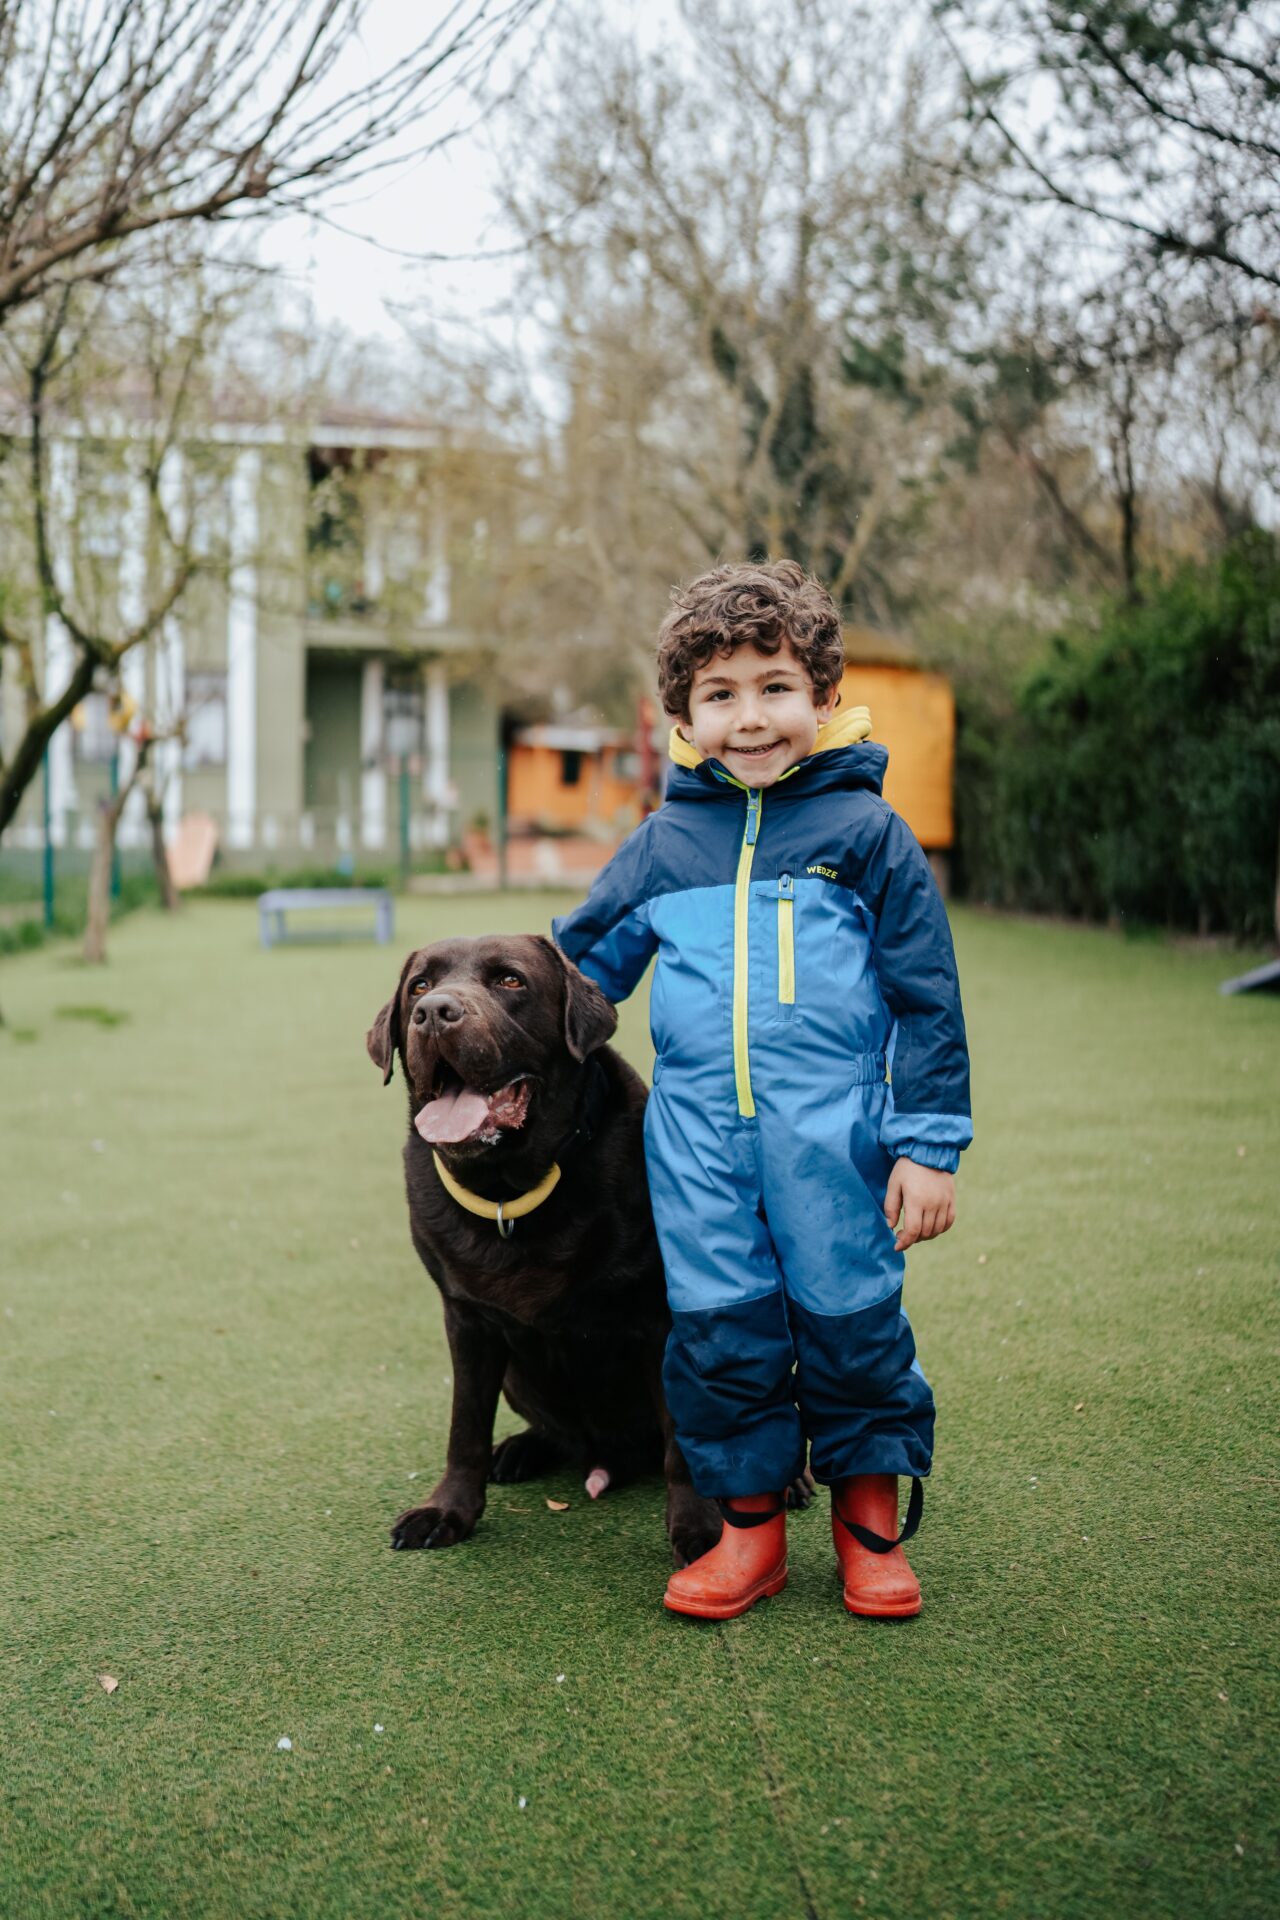 Child and dog standing and smiling in a backyard